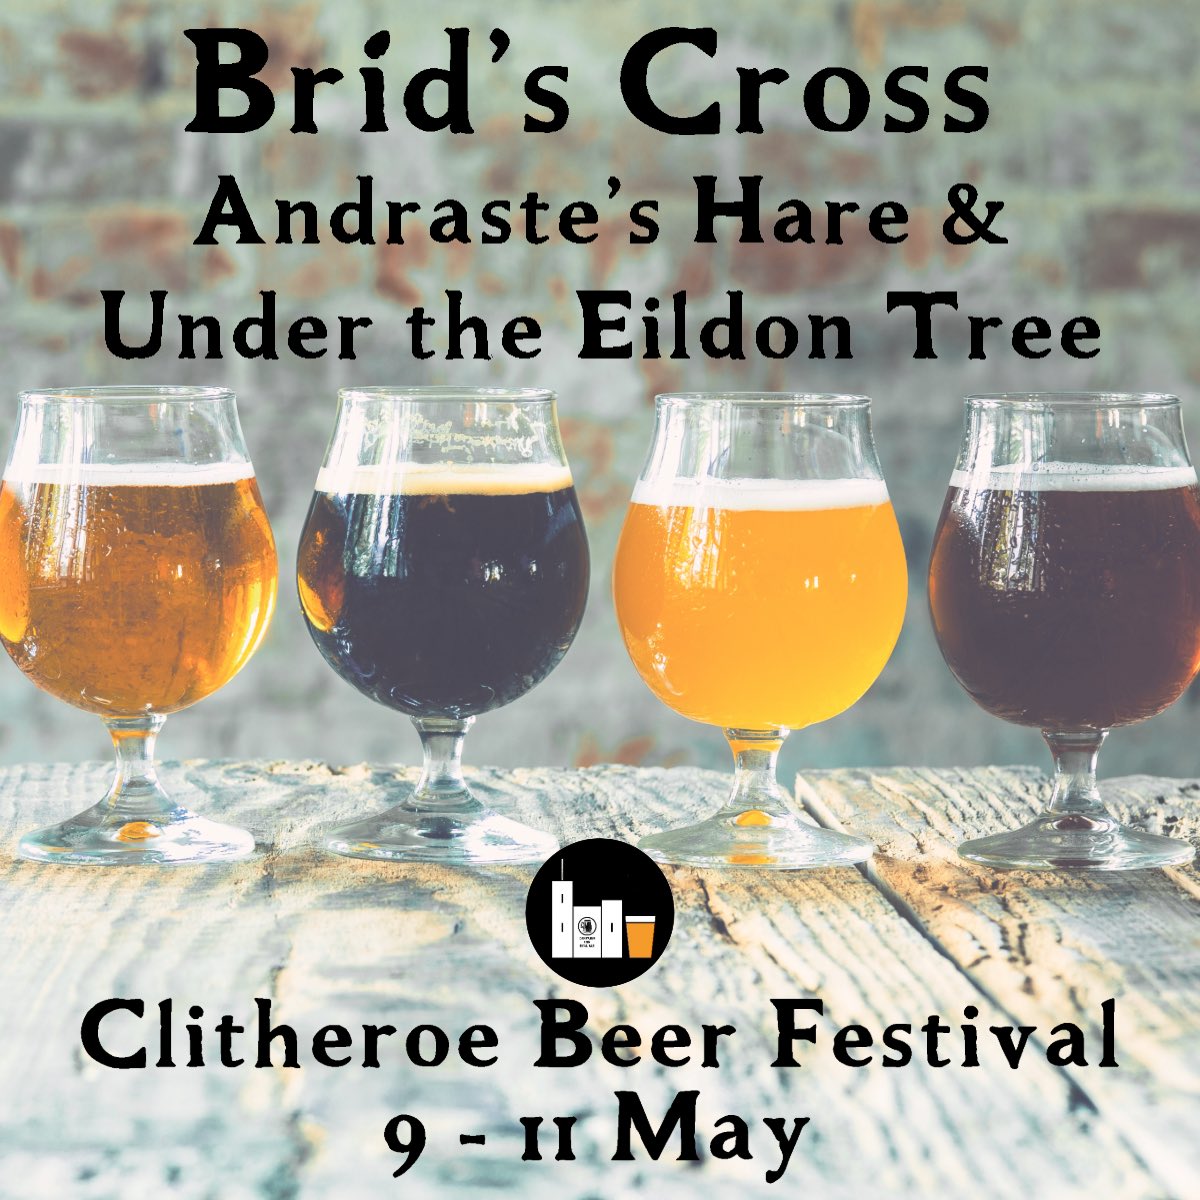 Our beers Andraste’s Hare (Golden Ale) and Under the Eildon Tree (WC IPA) will be pouring at @clithbeerfest 9-11 May. We will be there on Thursday for a couple of hours, come say hi

#beerfestival #beerfestivals #clitheroe #craftbeer #craftbeeruk #realale #camra #locale #folkale